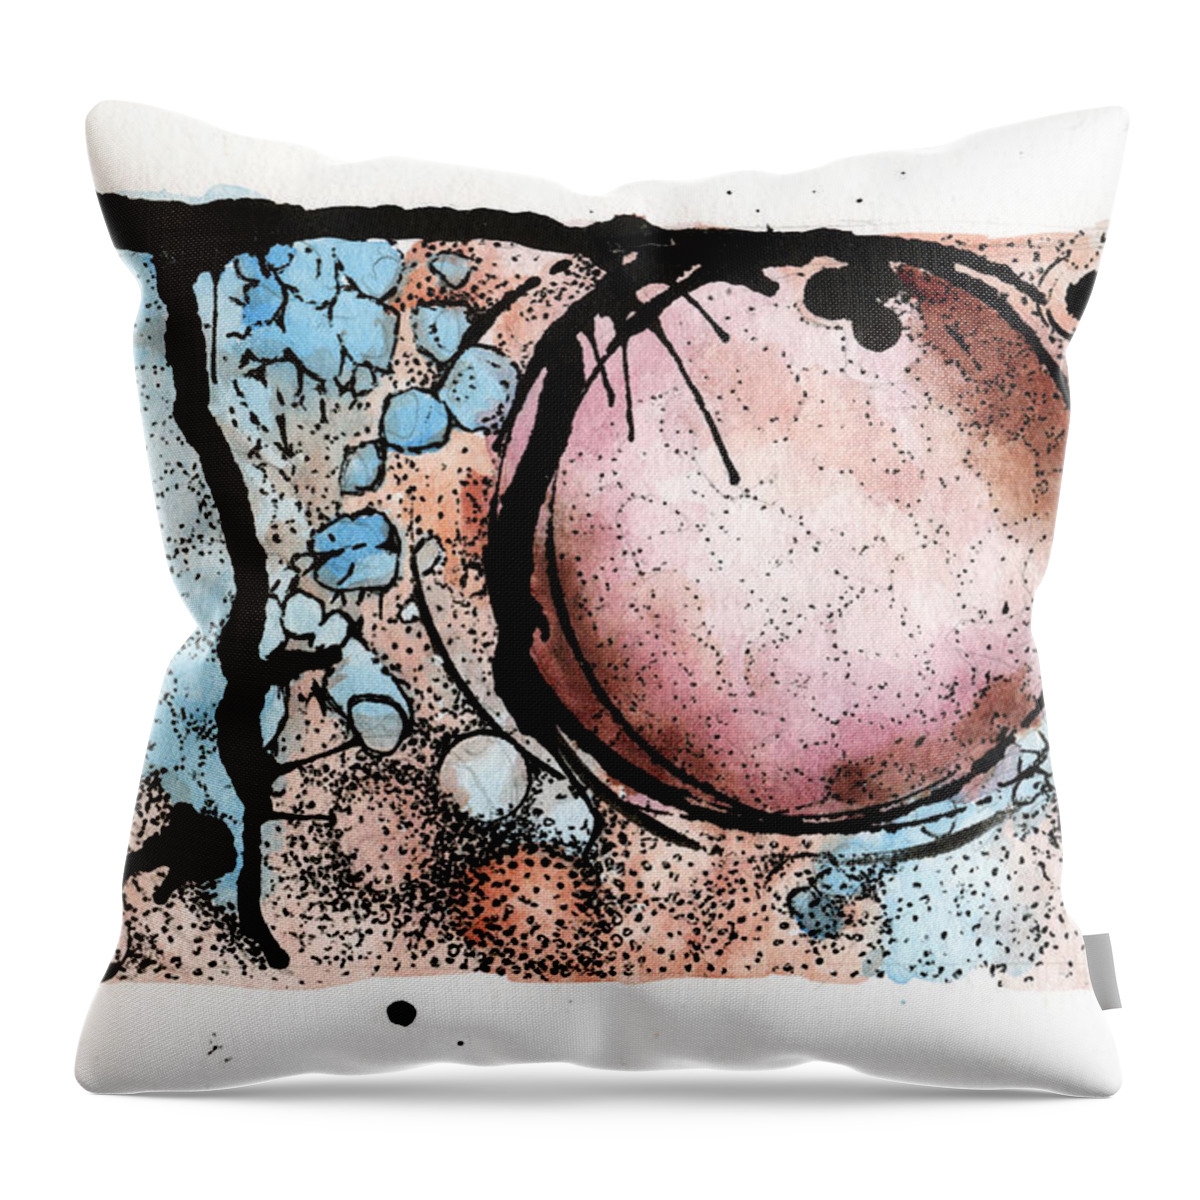 Watercolor Throw Pillow featuring the painting Internal landscape one by Mark M Mellon